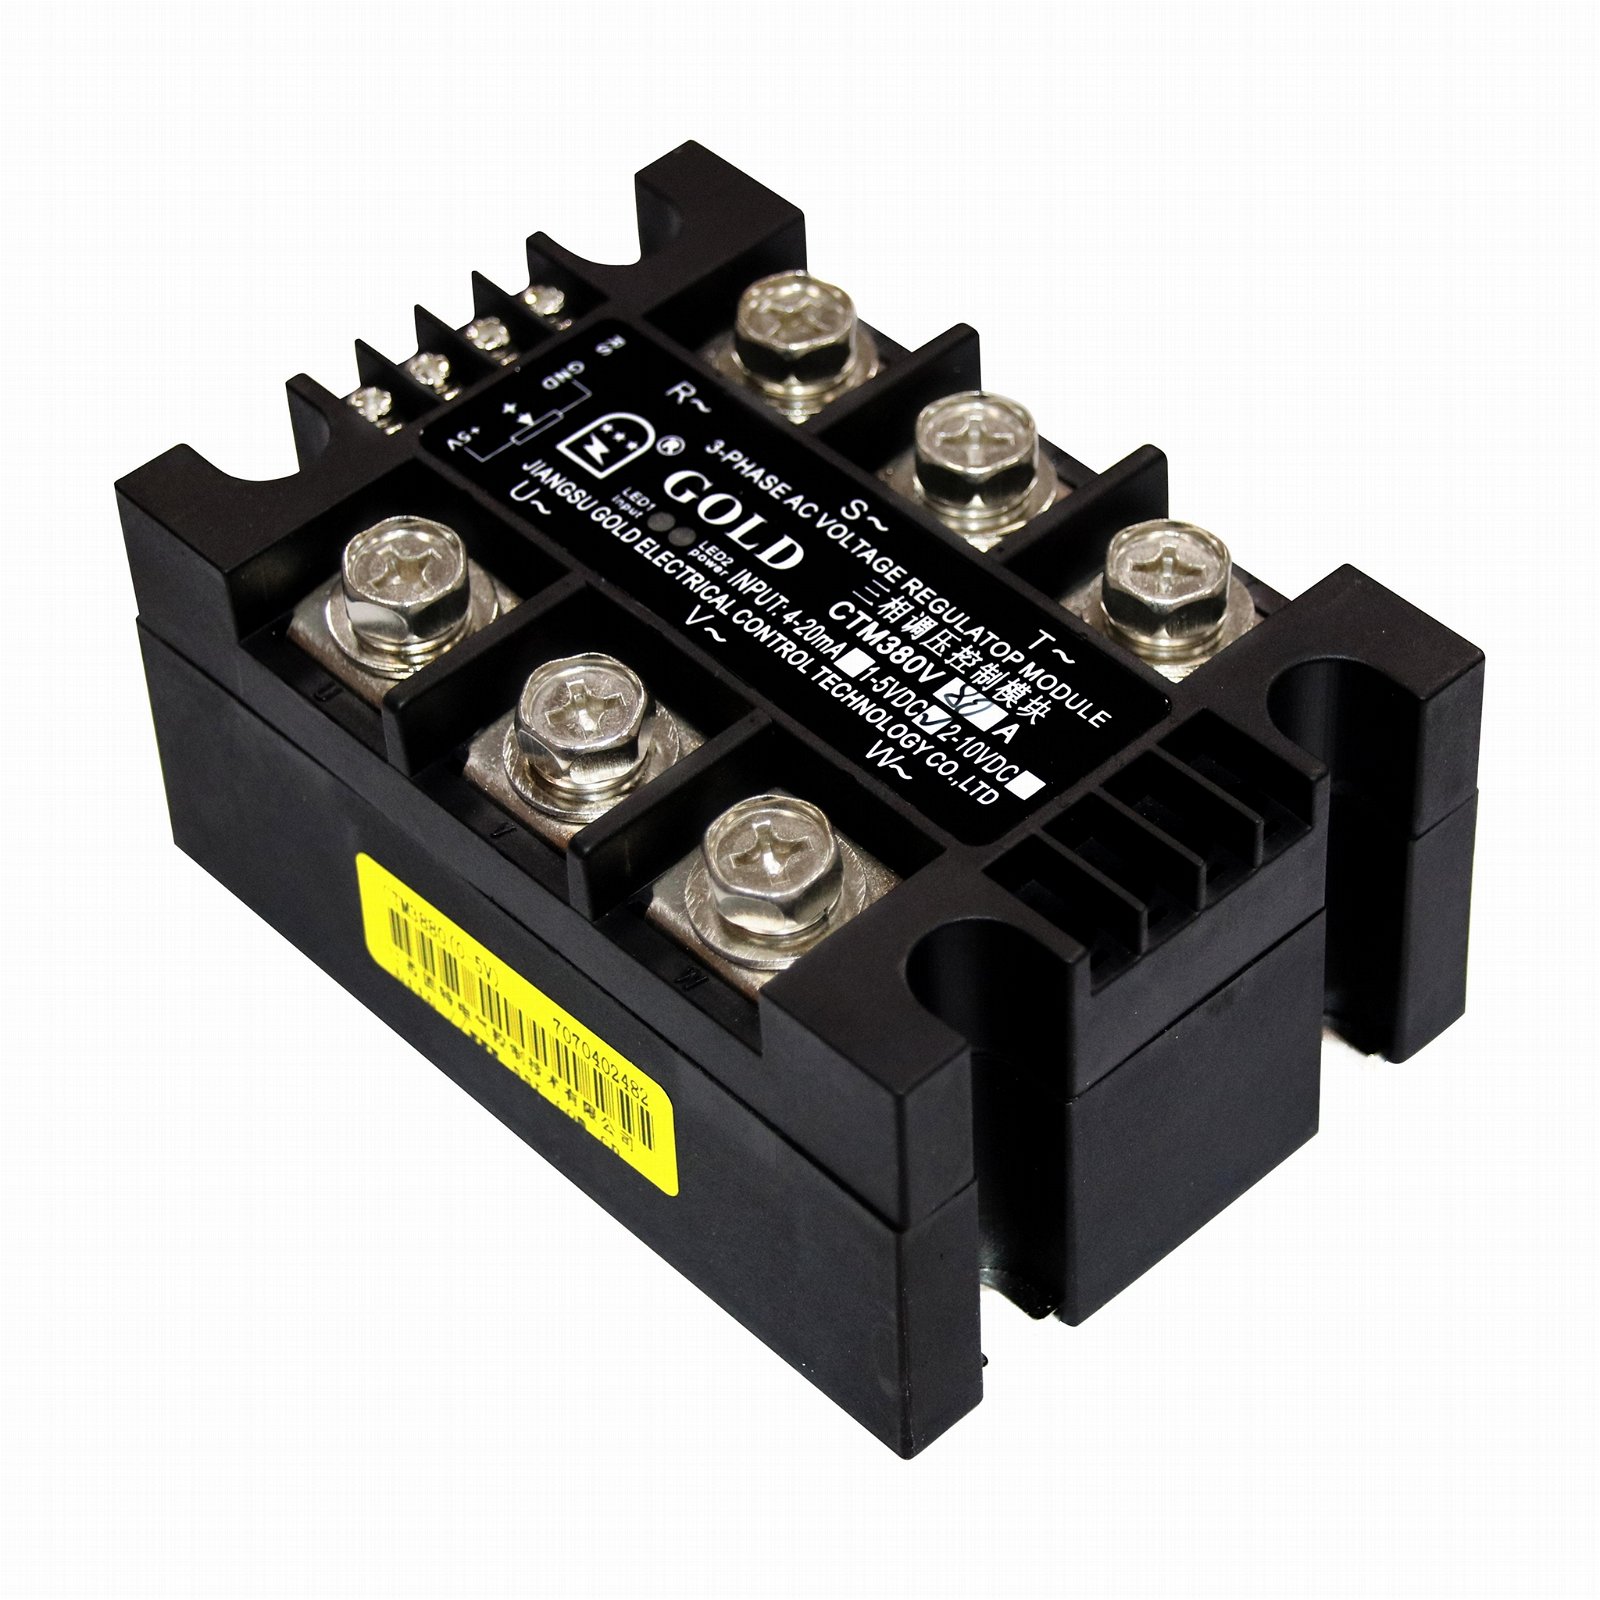 Three phase voltage moudles